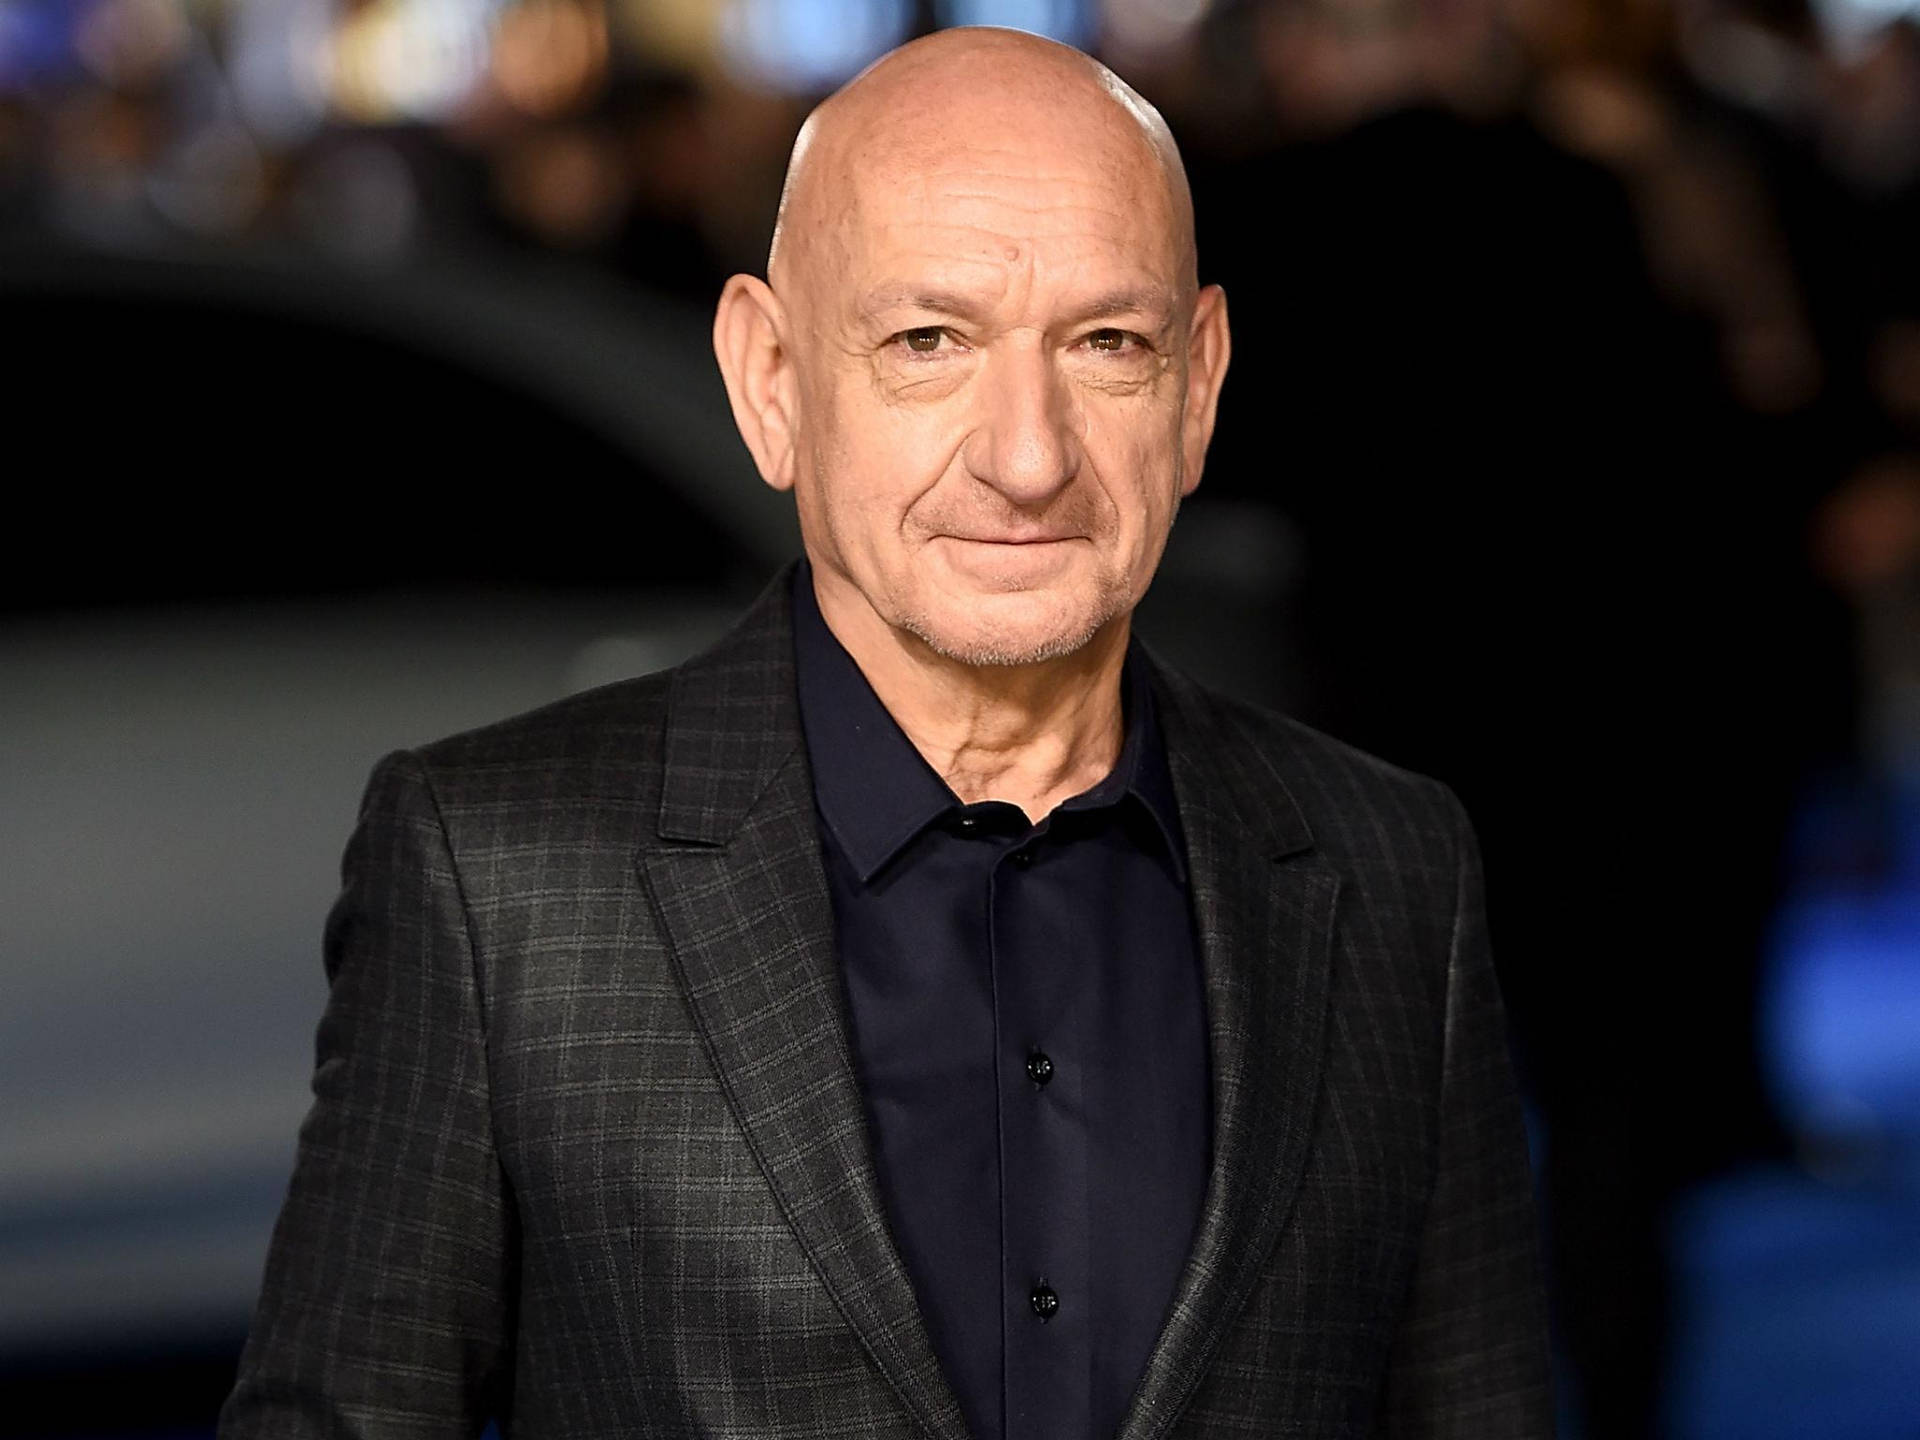 Ben Kingsley Night At The Museum 2014 Premiere Picture